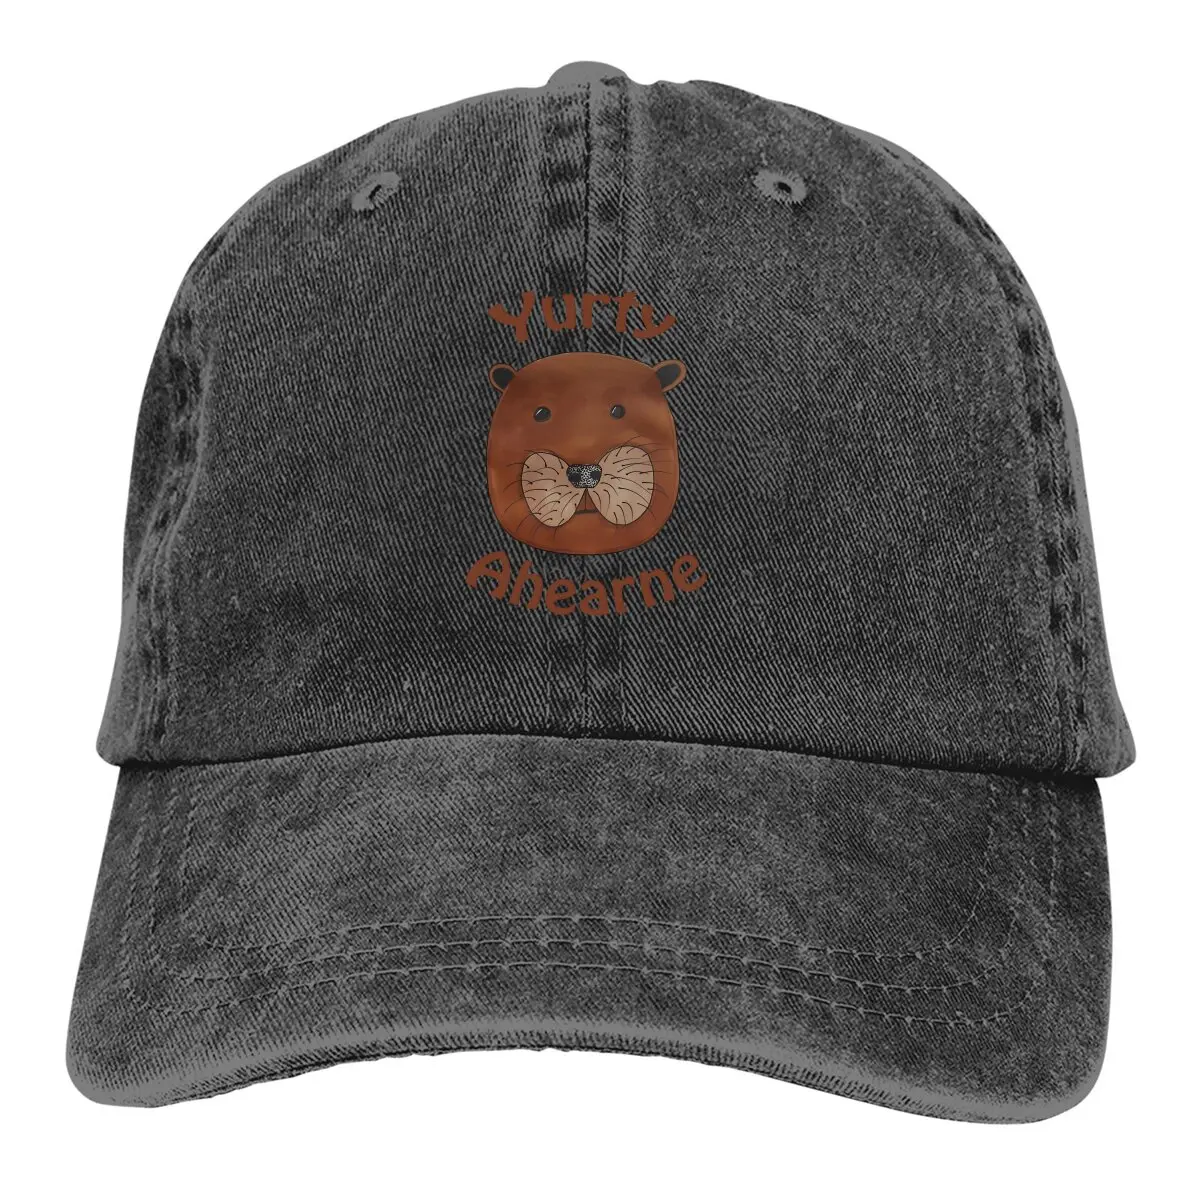 

Pure Color Dad Hats Otter Yurty Ahearne Patron Saint Of The Blindboy Podcast Women's Hat Sun Visor Baseball Otter Peaked Cap